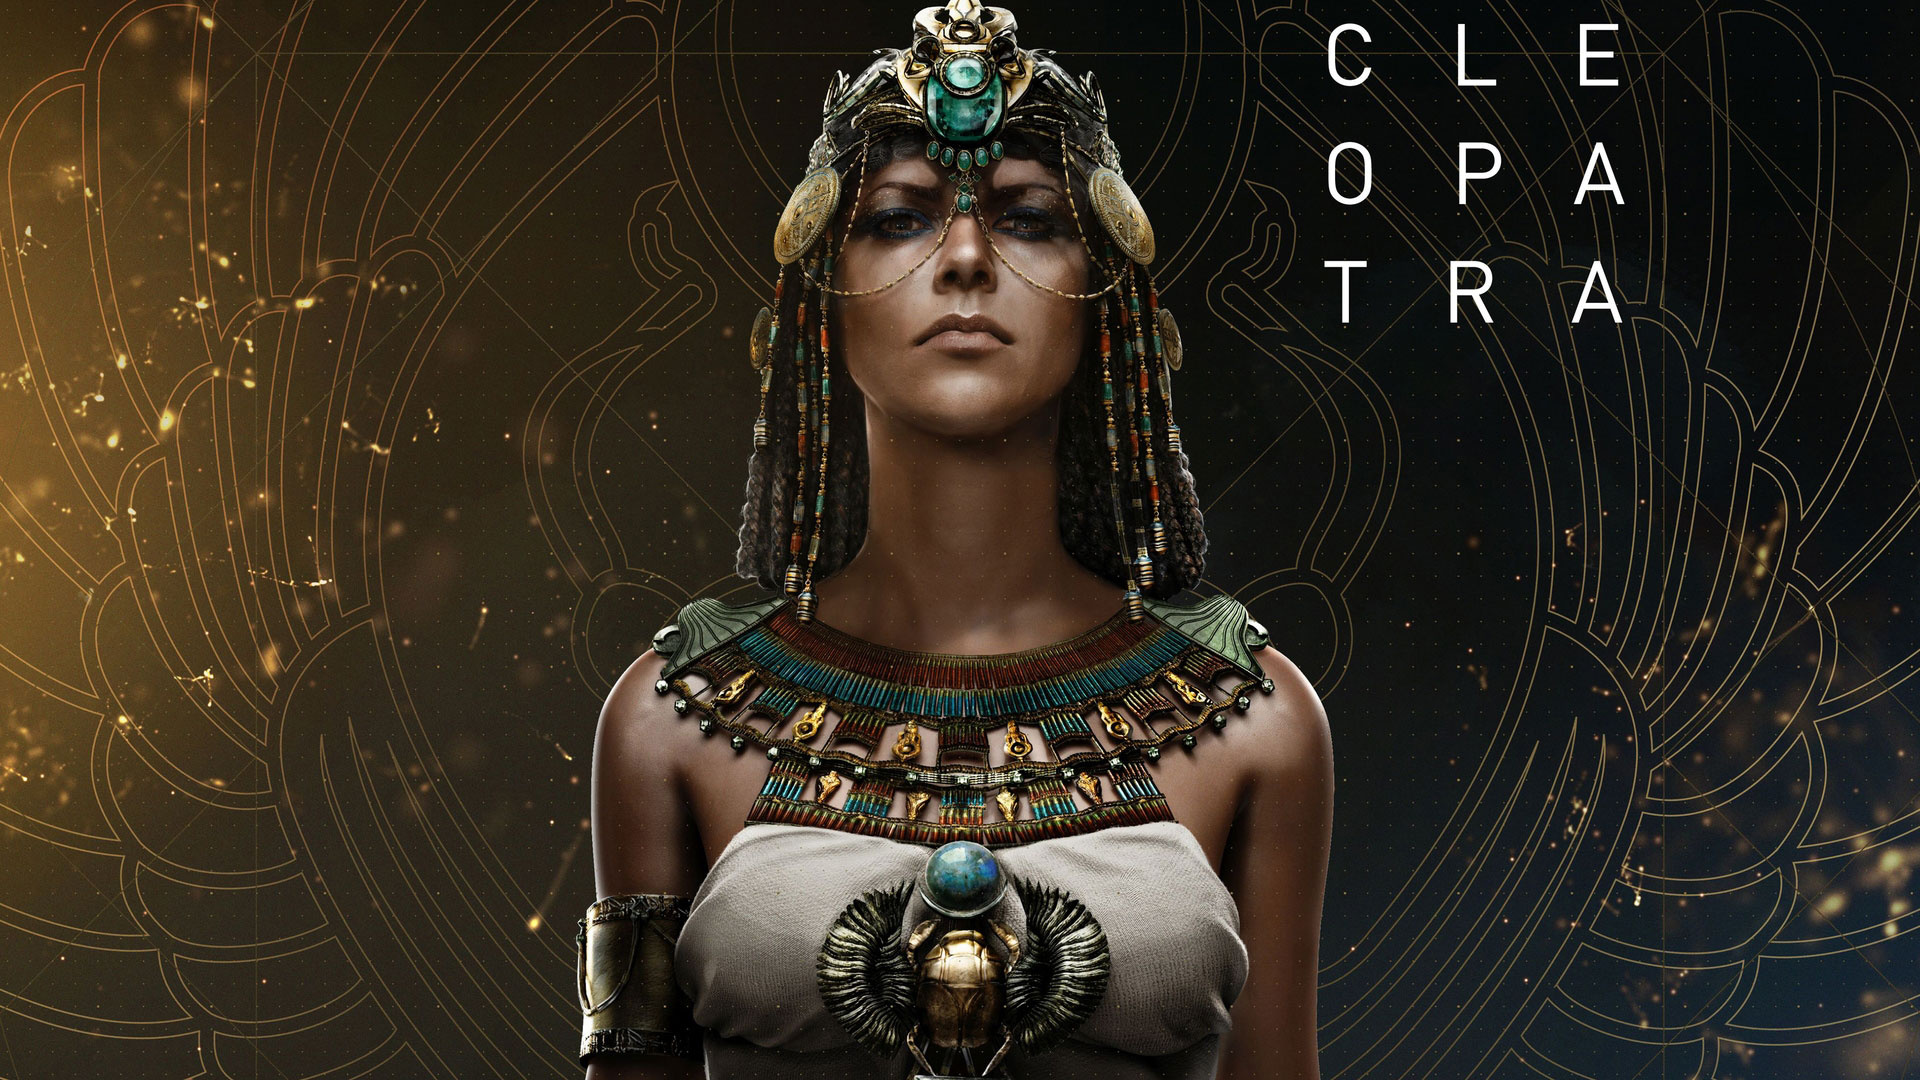 Assassin's Creed Origins wallpaper, Ancient Egypt setting, Gaming adventure, Action-packed, 1920x1080 Full HD Desktop